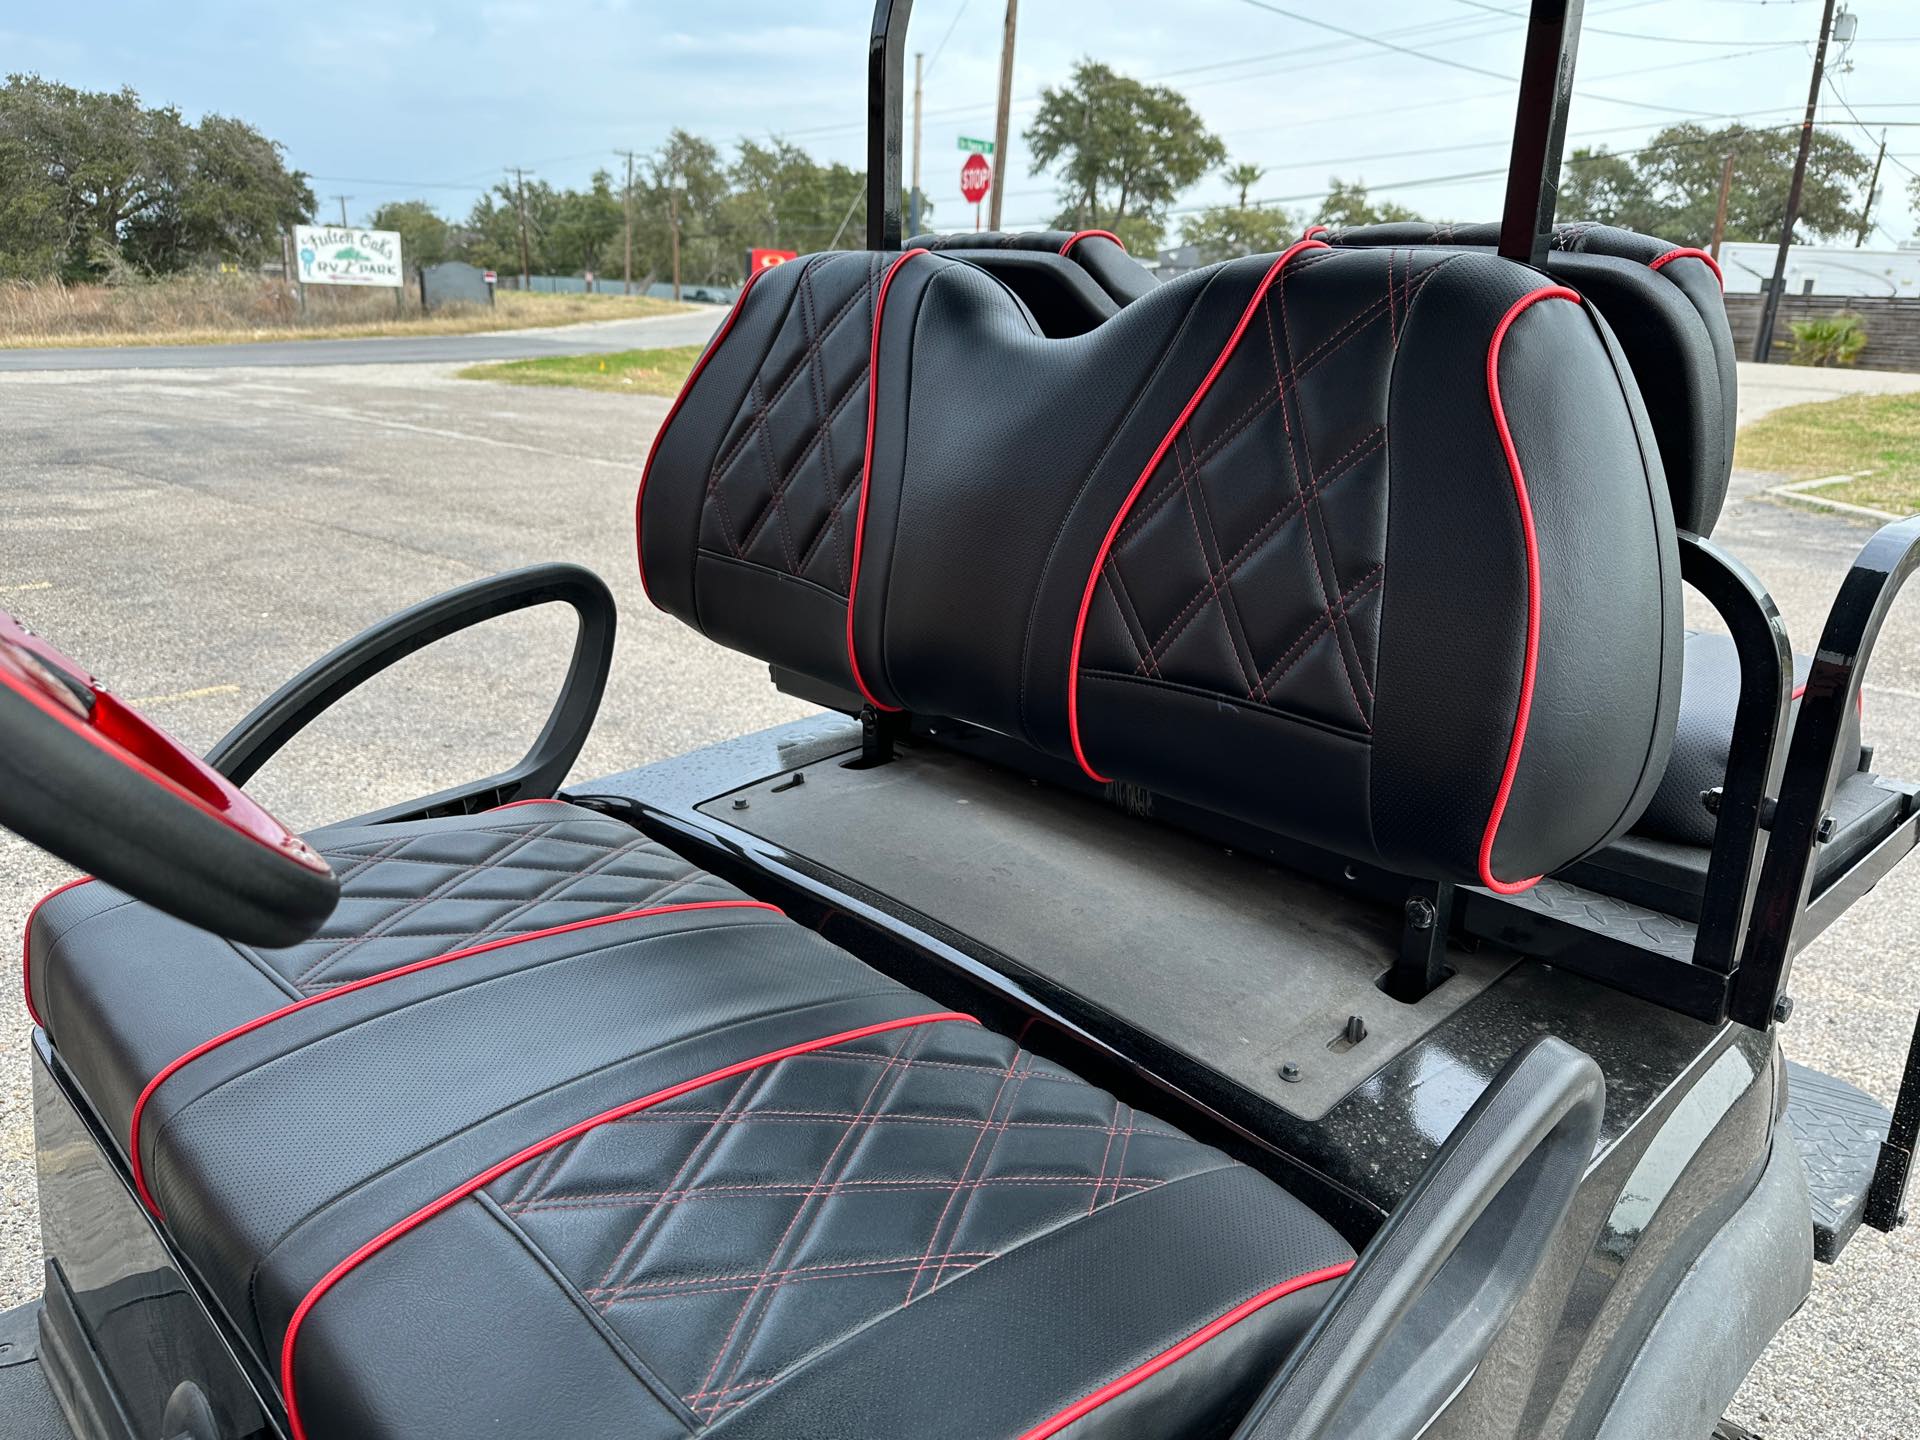 2019 Club Car Tempo 2+2 Gas at Clements Carts